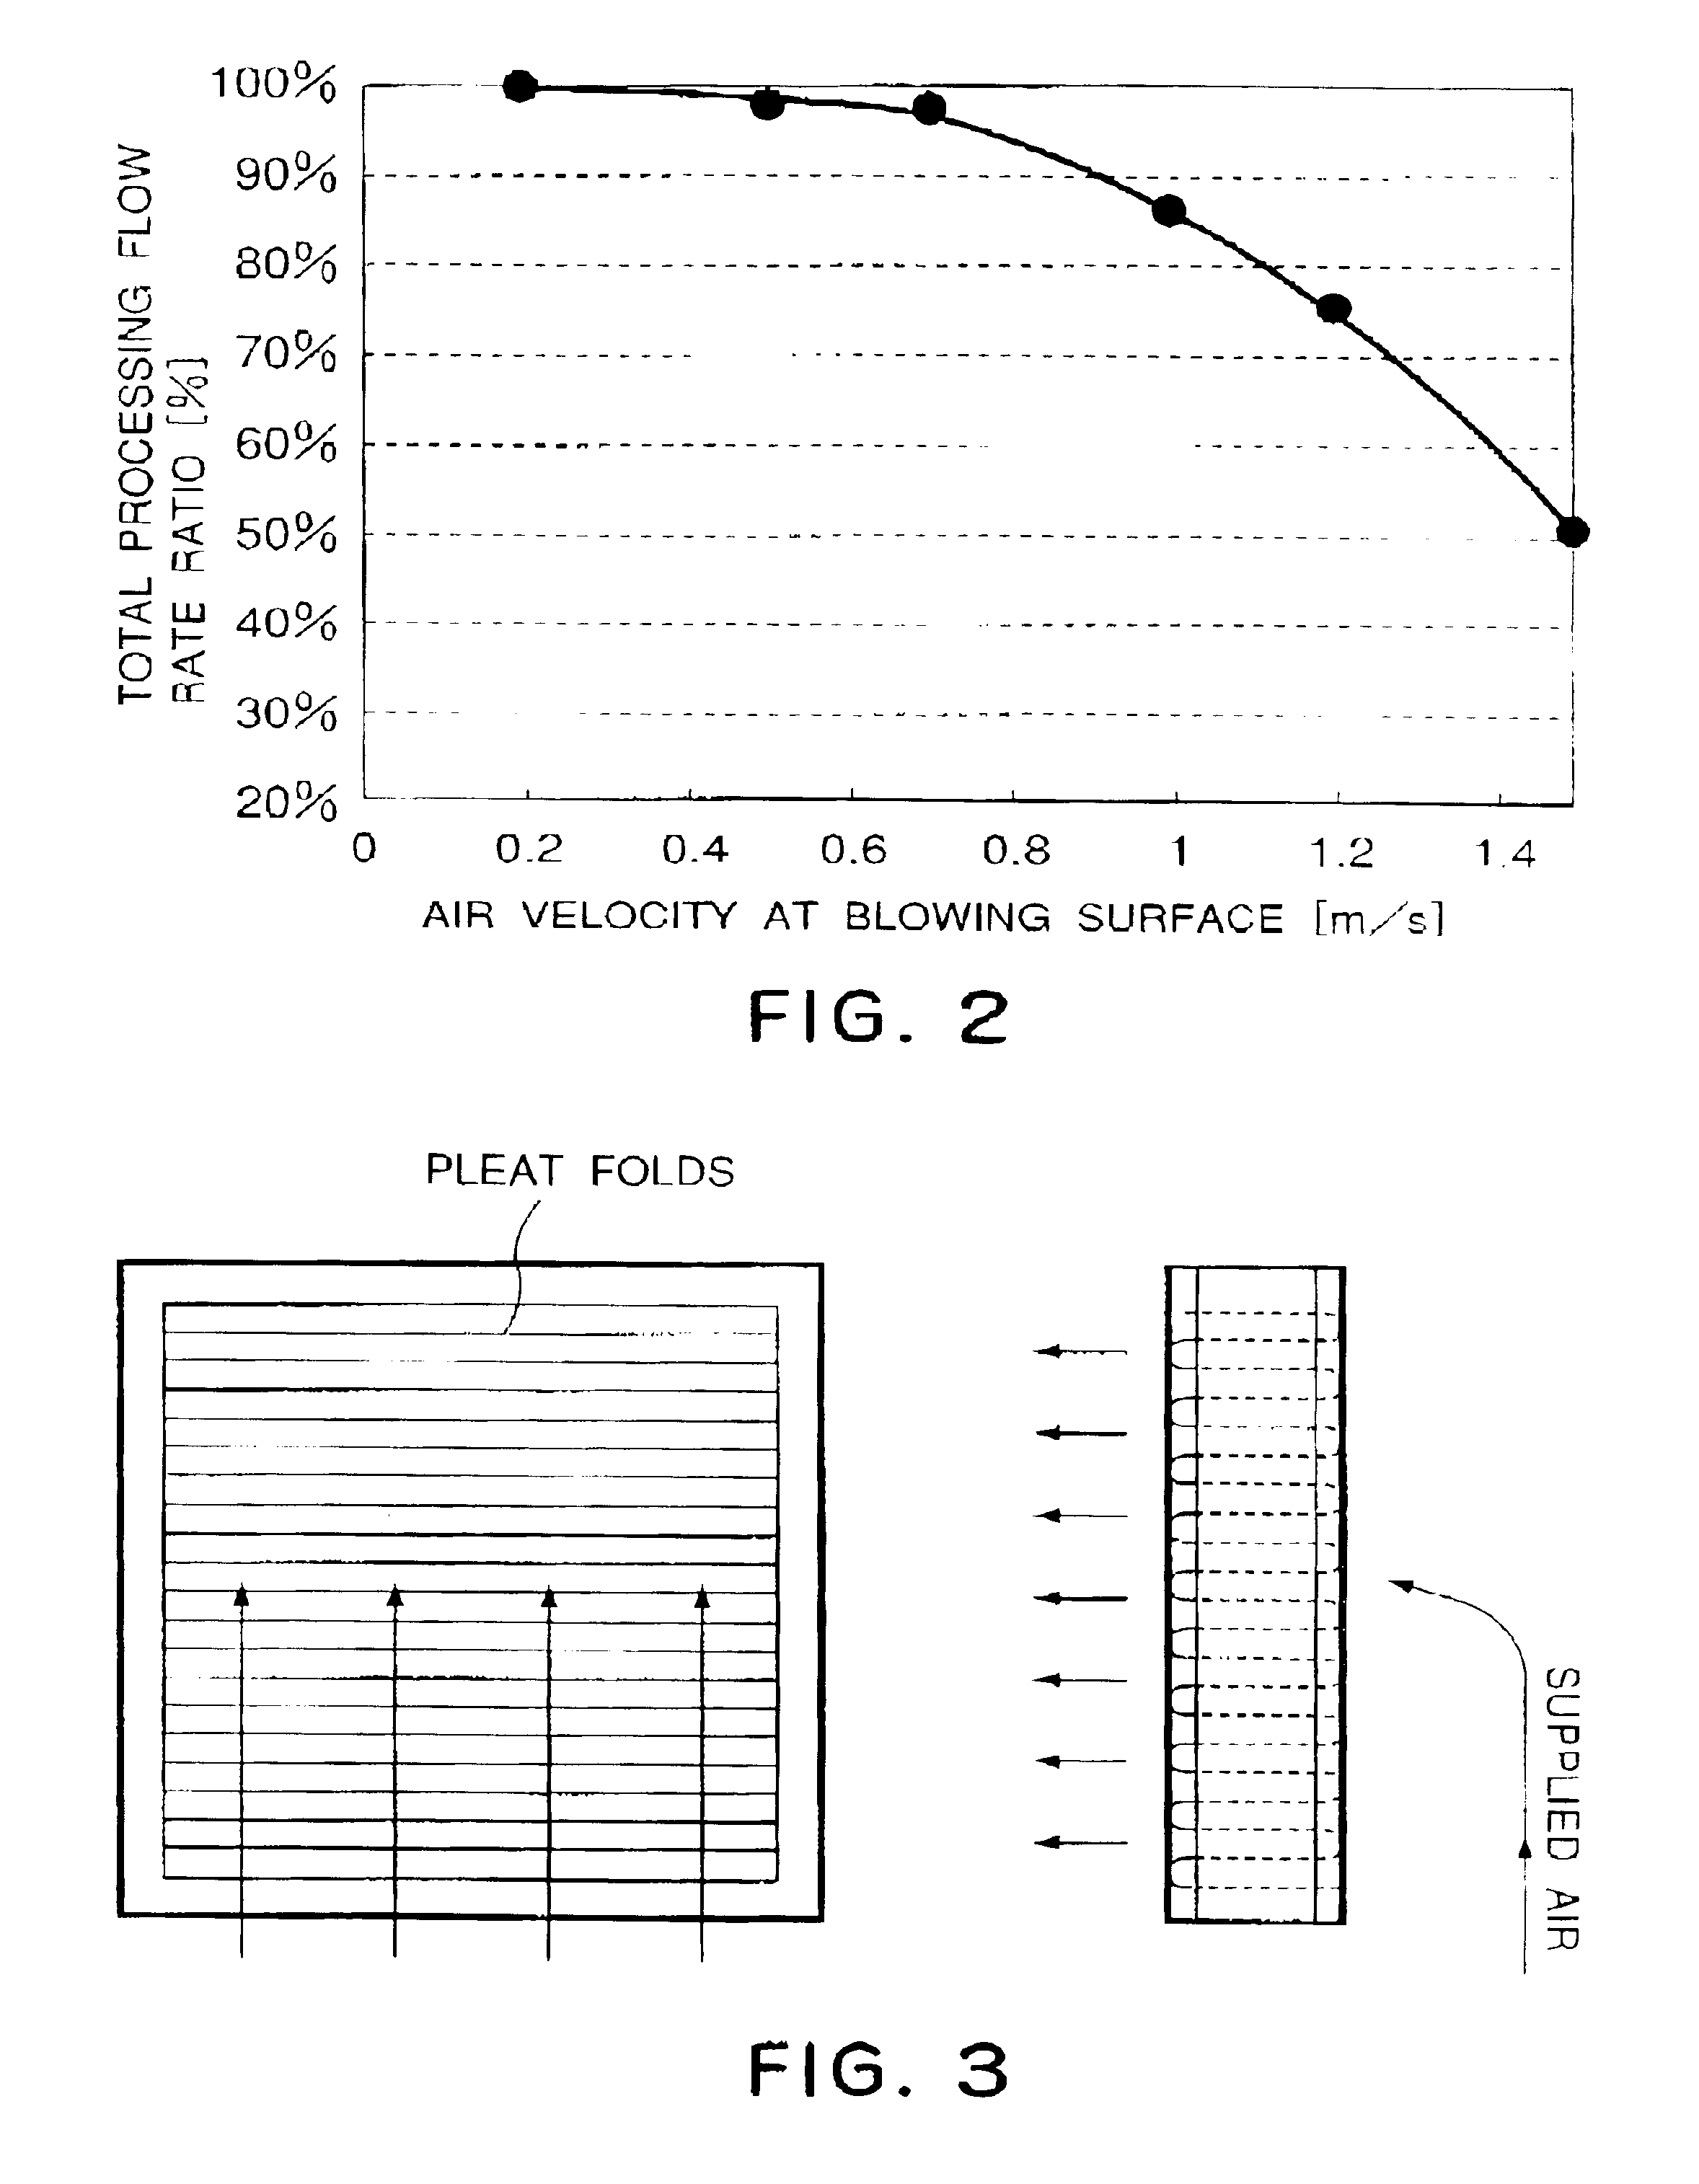 Chemical filter arrangement for a semiconductor manufacturing apparatus